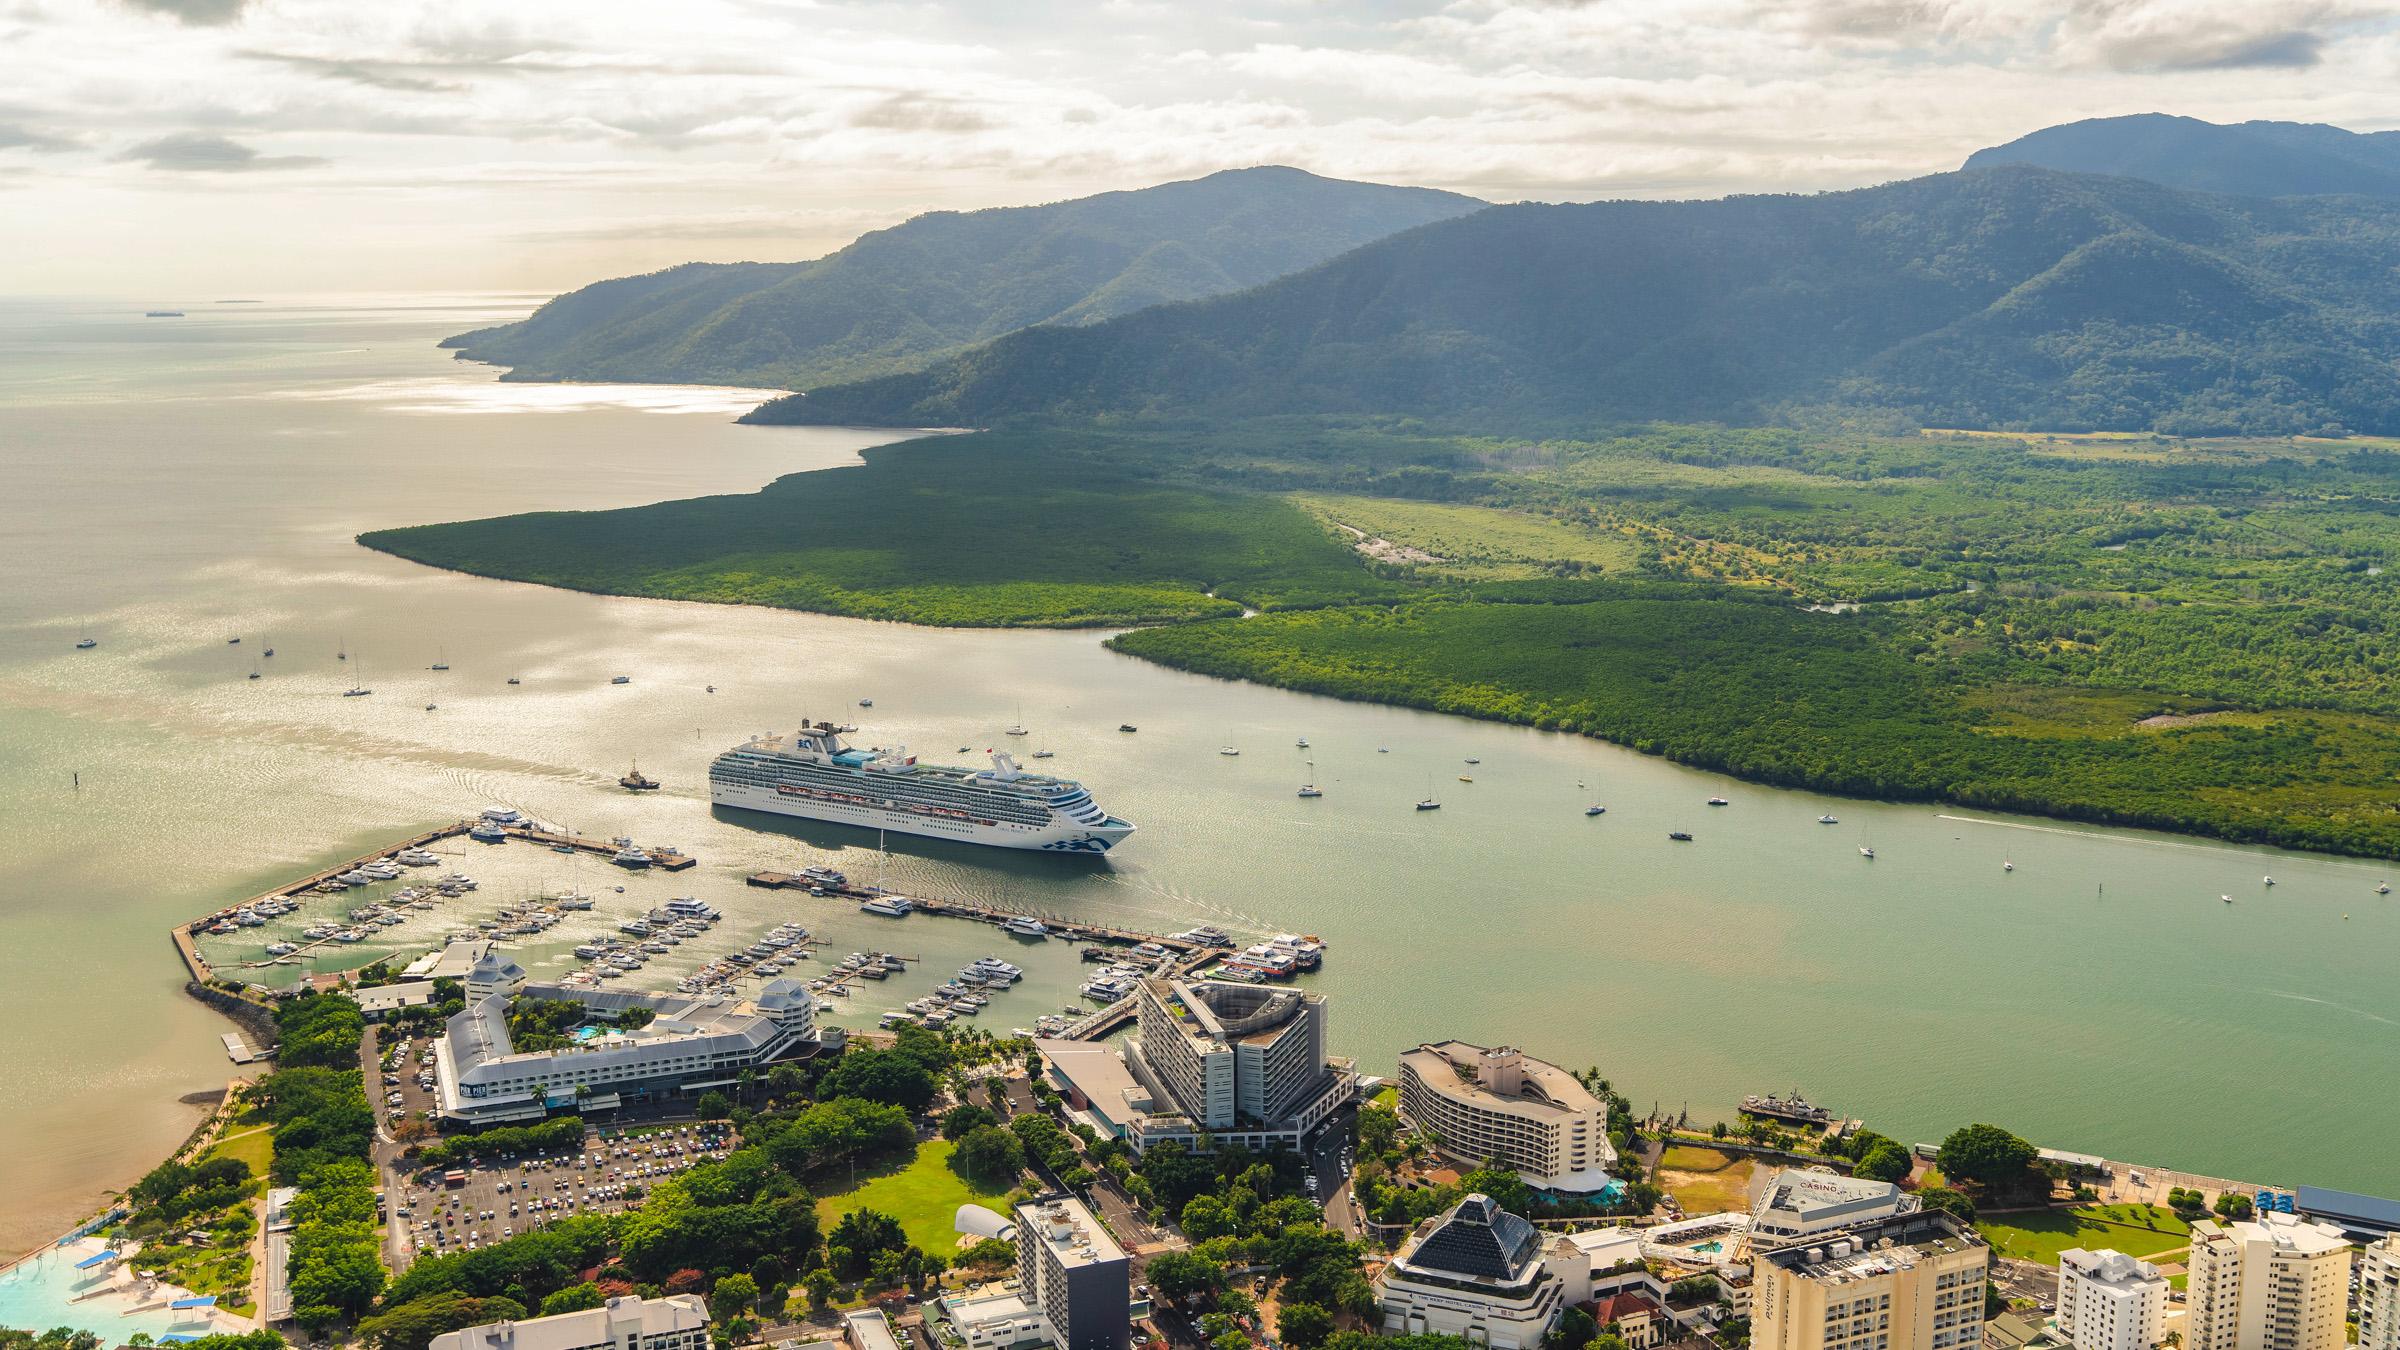 Aerial view of lush Cairns hinterland and Cairns Harbour, with cruise ship coming into dock